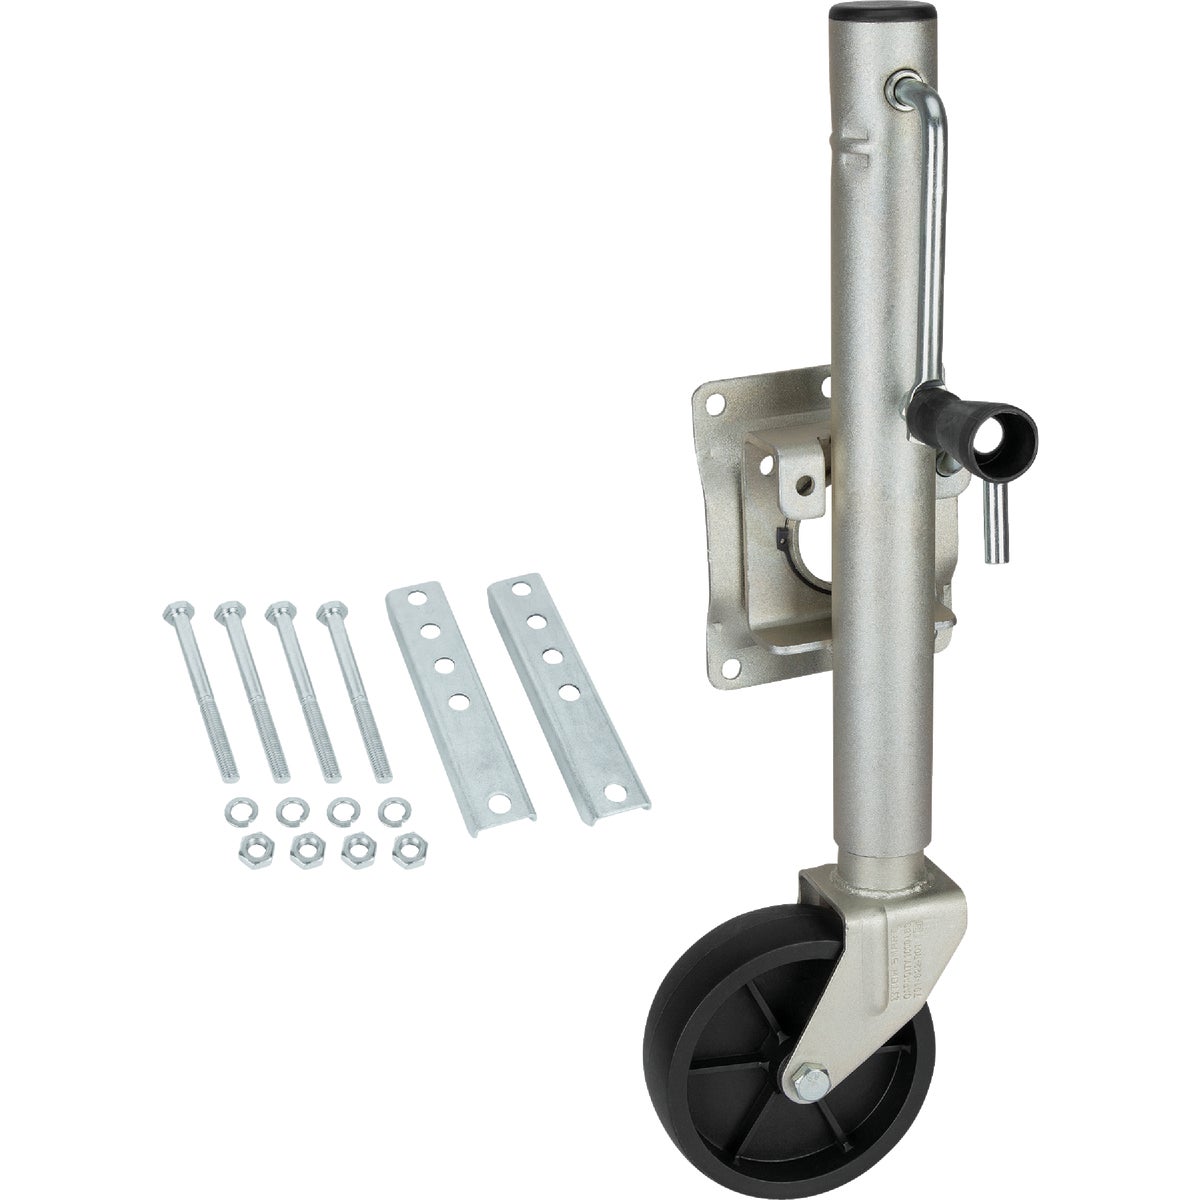 Item 582867, The Side Wind, Swing Down, Bolt On Trailer Jack allows you to raise and 